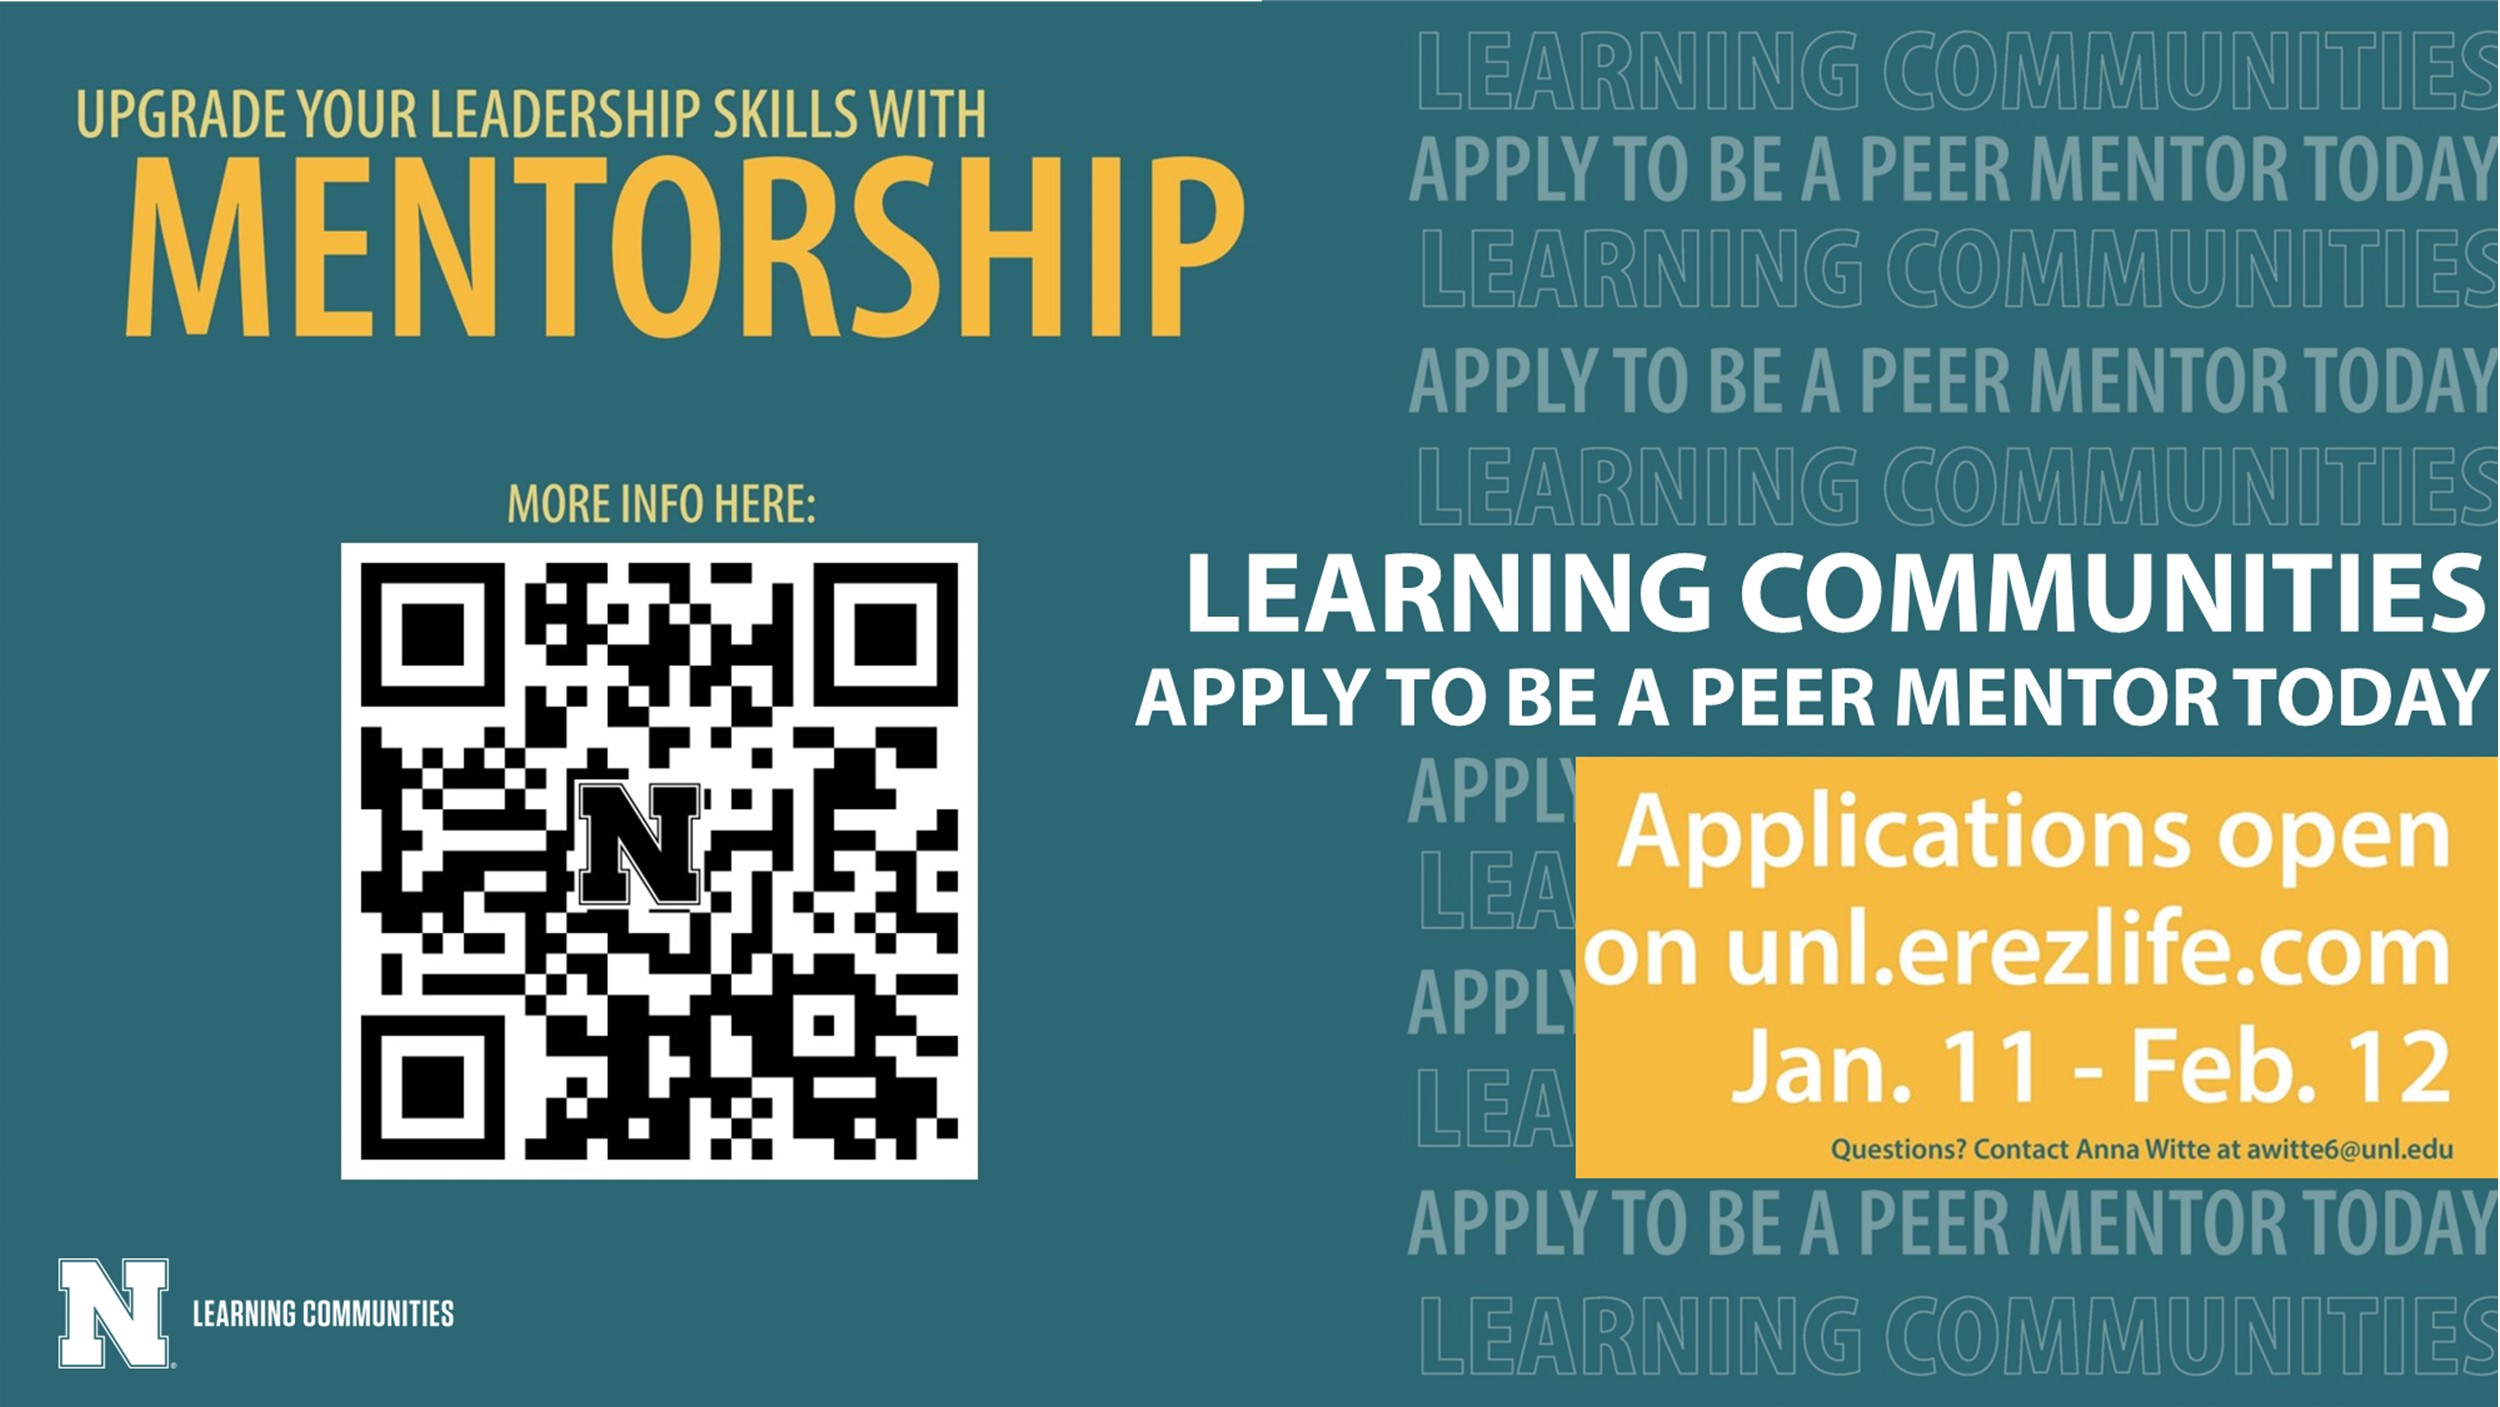 Ad to apply to be a mentor with a QR code for more information.